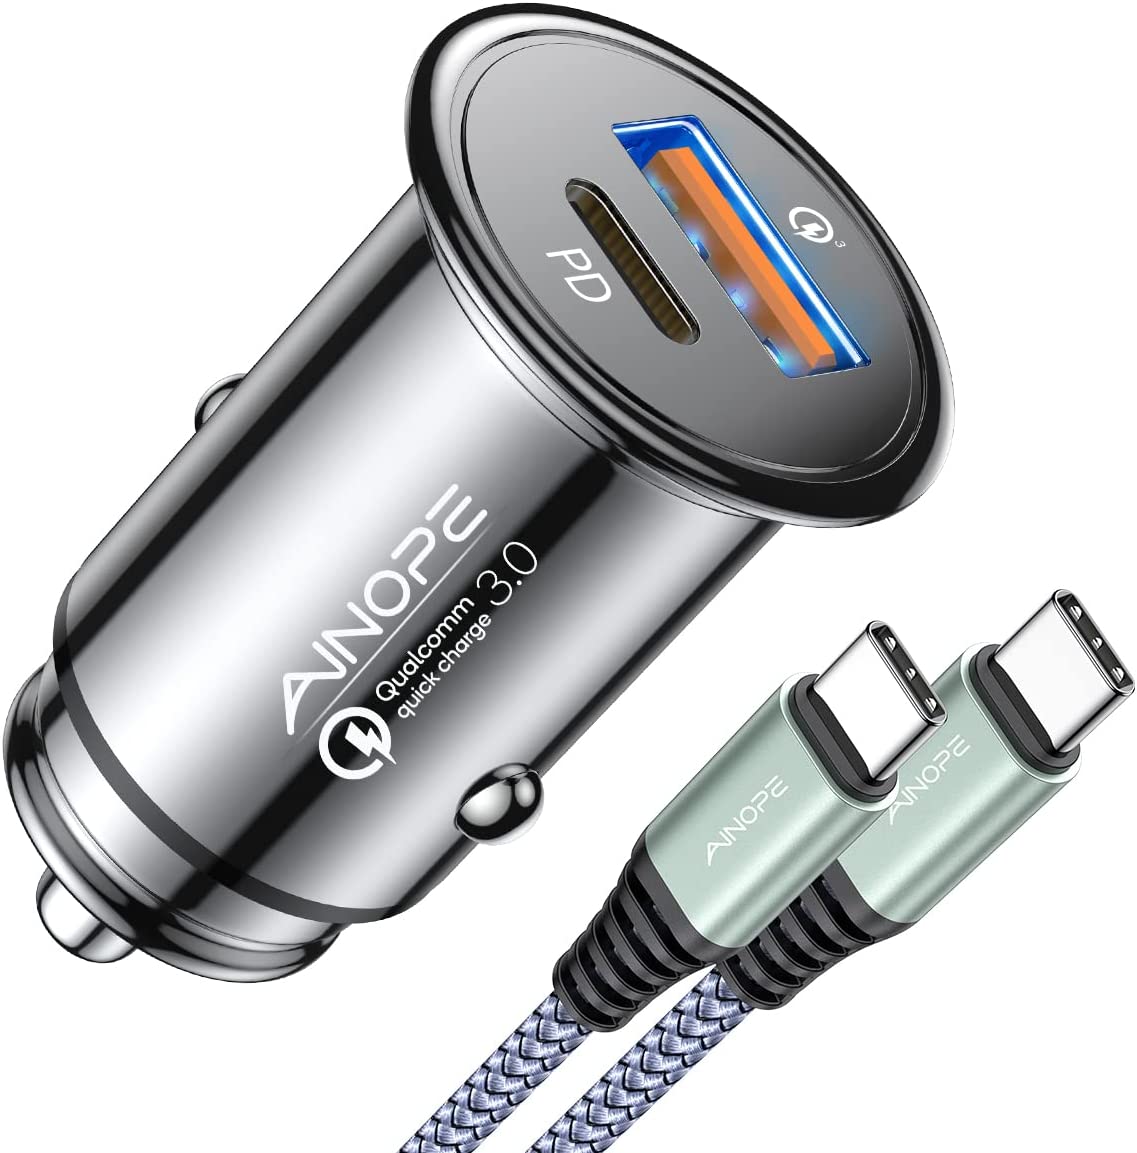 Smartphone Accessories: AINOPE Dual 60W USB-C/A Car Charger $12.50